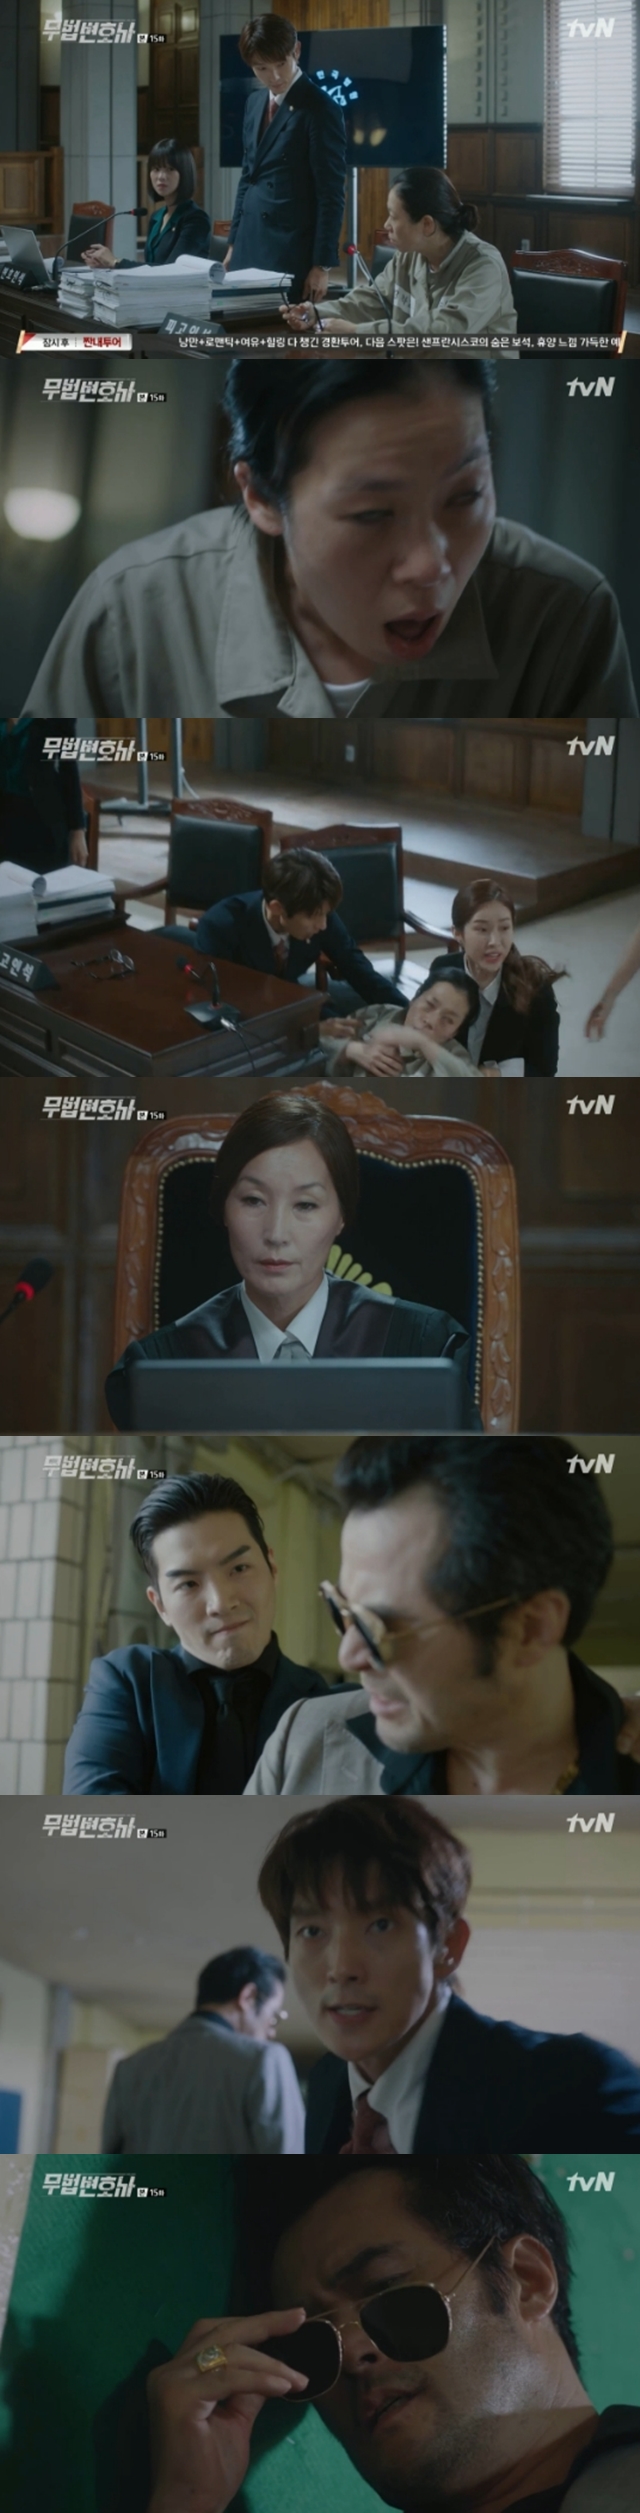 The Lee Joon-gi plan failed this time: Will his revenge be a joyful success in the one-time Lawless Lawyer?In the 15th episode of TVNs weekend drama Lawless Lawyer (playplayed by Yoon Hyun-ho/director Kim Jin-min/production studio Dragon Rogosfilm), which aired on June 30, plans for Bong Sang-pil (Lee Joon-gi) and Ha Jae-yi (Seo Ye-ji) were reversed and they were in danger of not catching Cha Moon-sook (Lee Hye-young).Bong Sang-pil, who was in charge of defending Nam Soon-ja (Yeom Hye-ran), put Han Joo-pil of Ki Sung-il, who went to the prosecutors Innocent Witness, into a corner and put the scorpion as Innocent Witness to testify that he executed Noh Hyun-joo (Baek Joo-hee) Murder.The scorpion was more strangled by Cha Moon-sook, testifying in the Innocent Witness seat that Murder was ordered; there seems to be another one on the defendant Nam Soon-ja.The next plan is for Nam Soon-ja to directly state Cha Moon-sooks name at the trial, and An Oh-ju (Choi Min-soo) to stand in court and prove Cha Moon-sooks sin.Bong Sang-pil and Ha Jae-yi persuaded Nam Soon-ja and tried to attract An O-ju. It was because of this operation that he persuaded prosecutor Chun Seung-beom (Park Ho-san) to release An-o-jus wanted nomination.On the day of the trial, Nam Soon-ja fell down complaining of pain while trying to say, I am the Thai chiropractor.Ha Jae-yi told Nam Soon-jas daughter Kang Yeon-hee (Cha Jung-won) not to be fooled by Cha Moon-sook.Nam Soon-ja was expected to unveil the reality of Cha Moon-sook, but he fell and Bong Sang-pils operation failed.At the same time, he called Bong Sang-pil and declared that he would not hold Bong Sang-pils hand, saying, Know and do well alone.So Bong Sang-pil ran to catch An-oh, and An-oh fell down with a knife to Kim, who received the owner of Cha Moon-sook.kim ye-eun